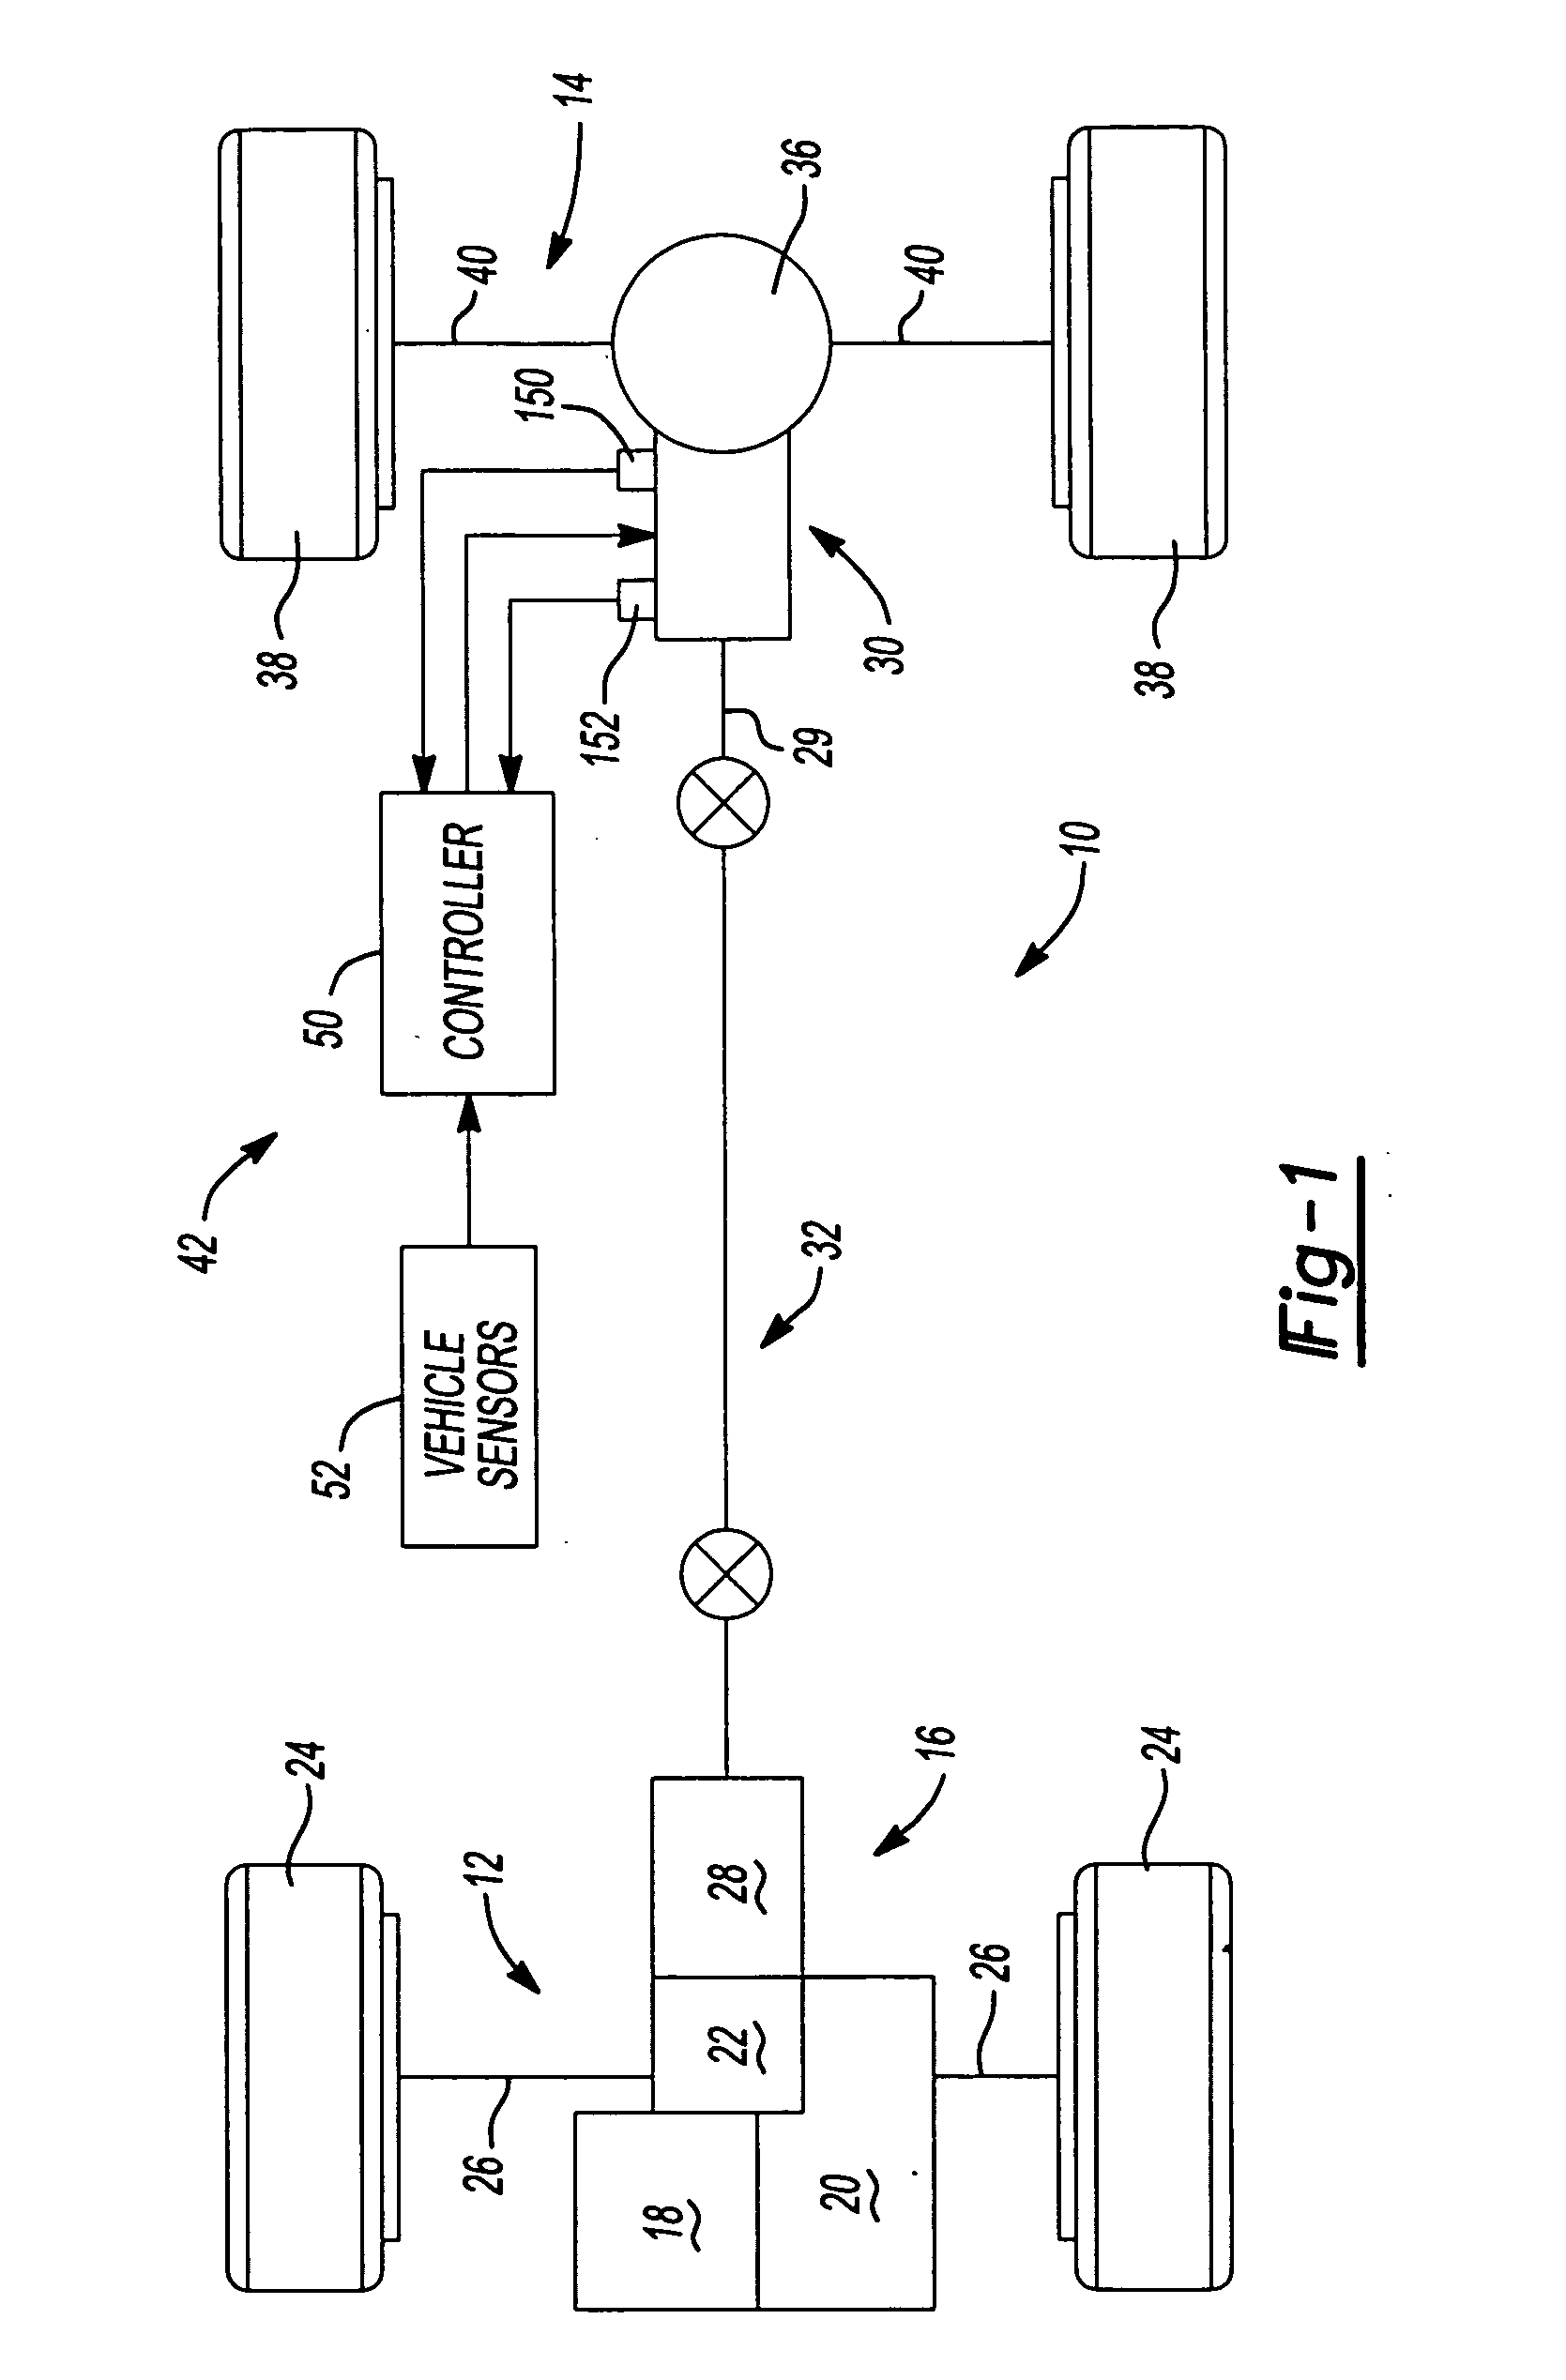 Electronically-controlled hydraulically-actuated coupling